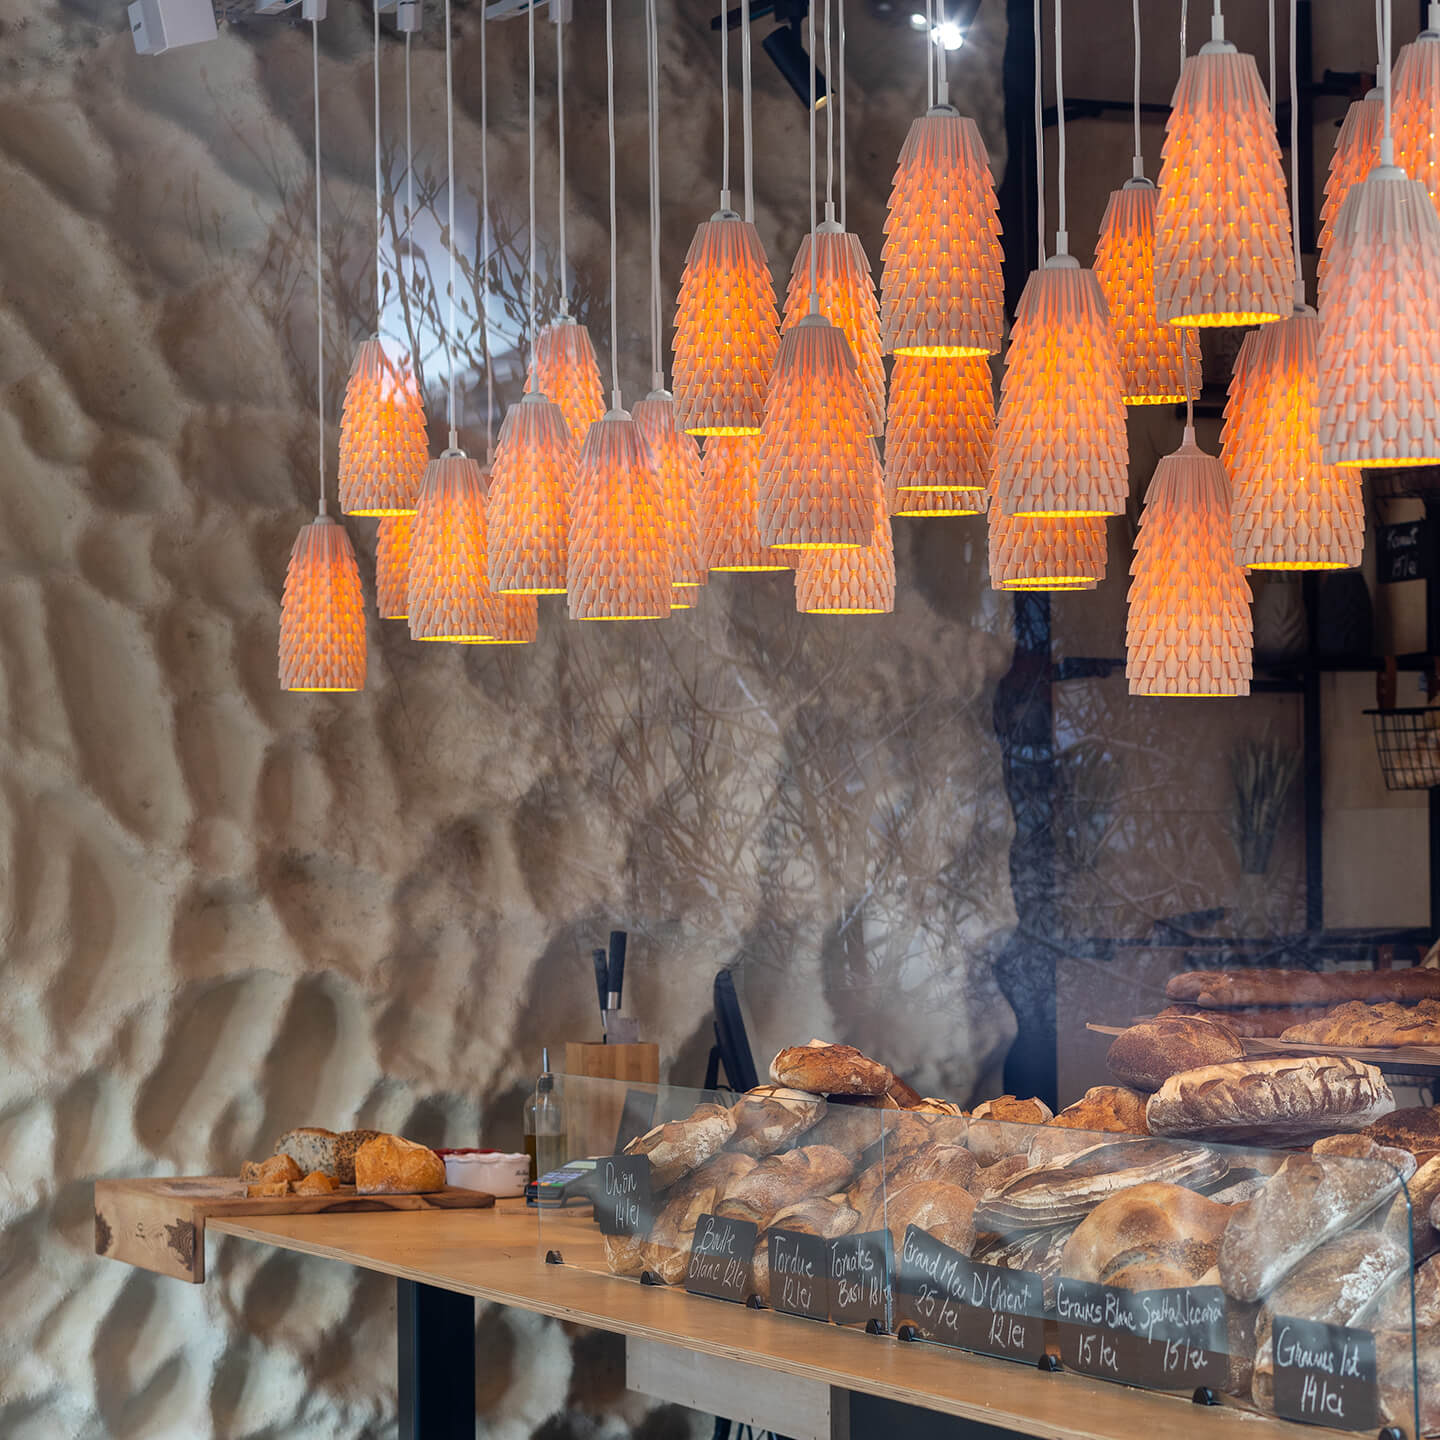 A cluster of 33 Armadillo Lamps in a bakery